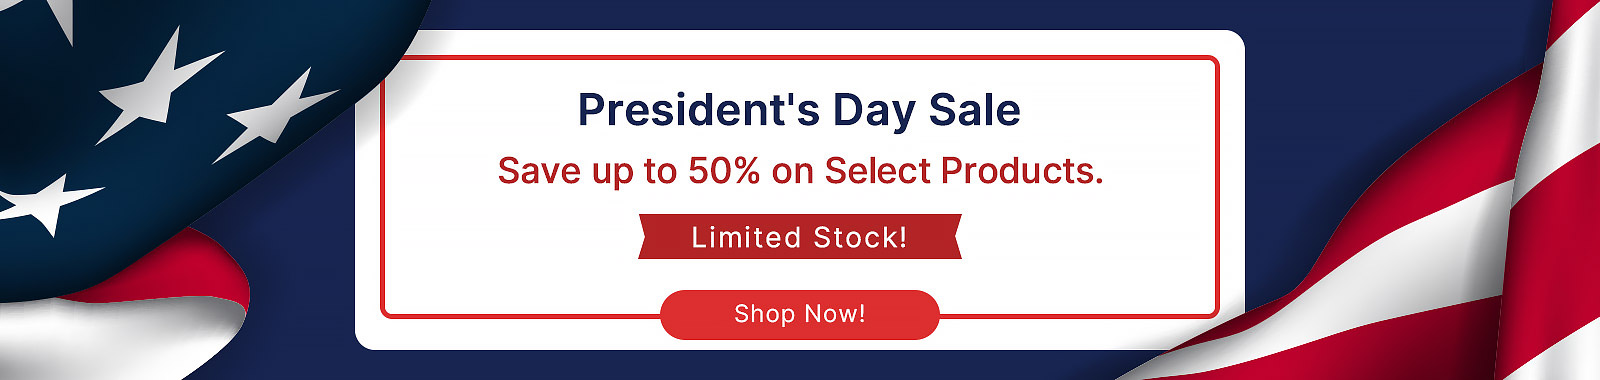 Up to 50% OFF on select items. Limited time only!